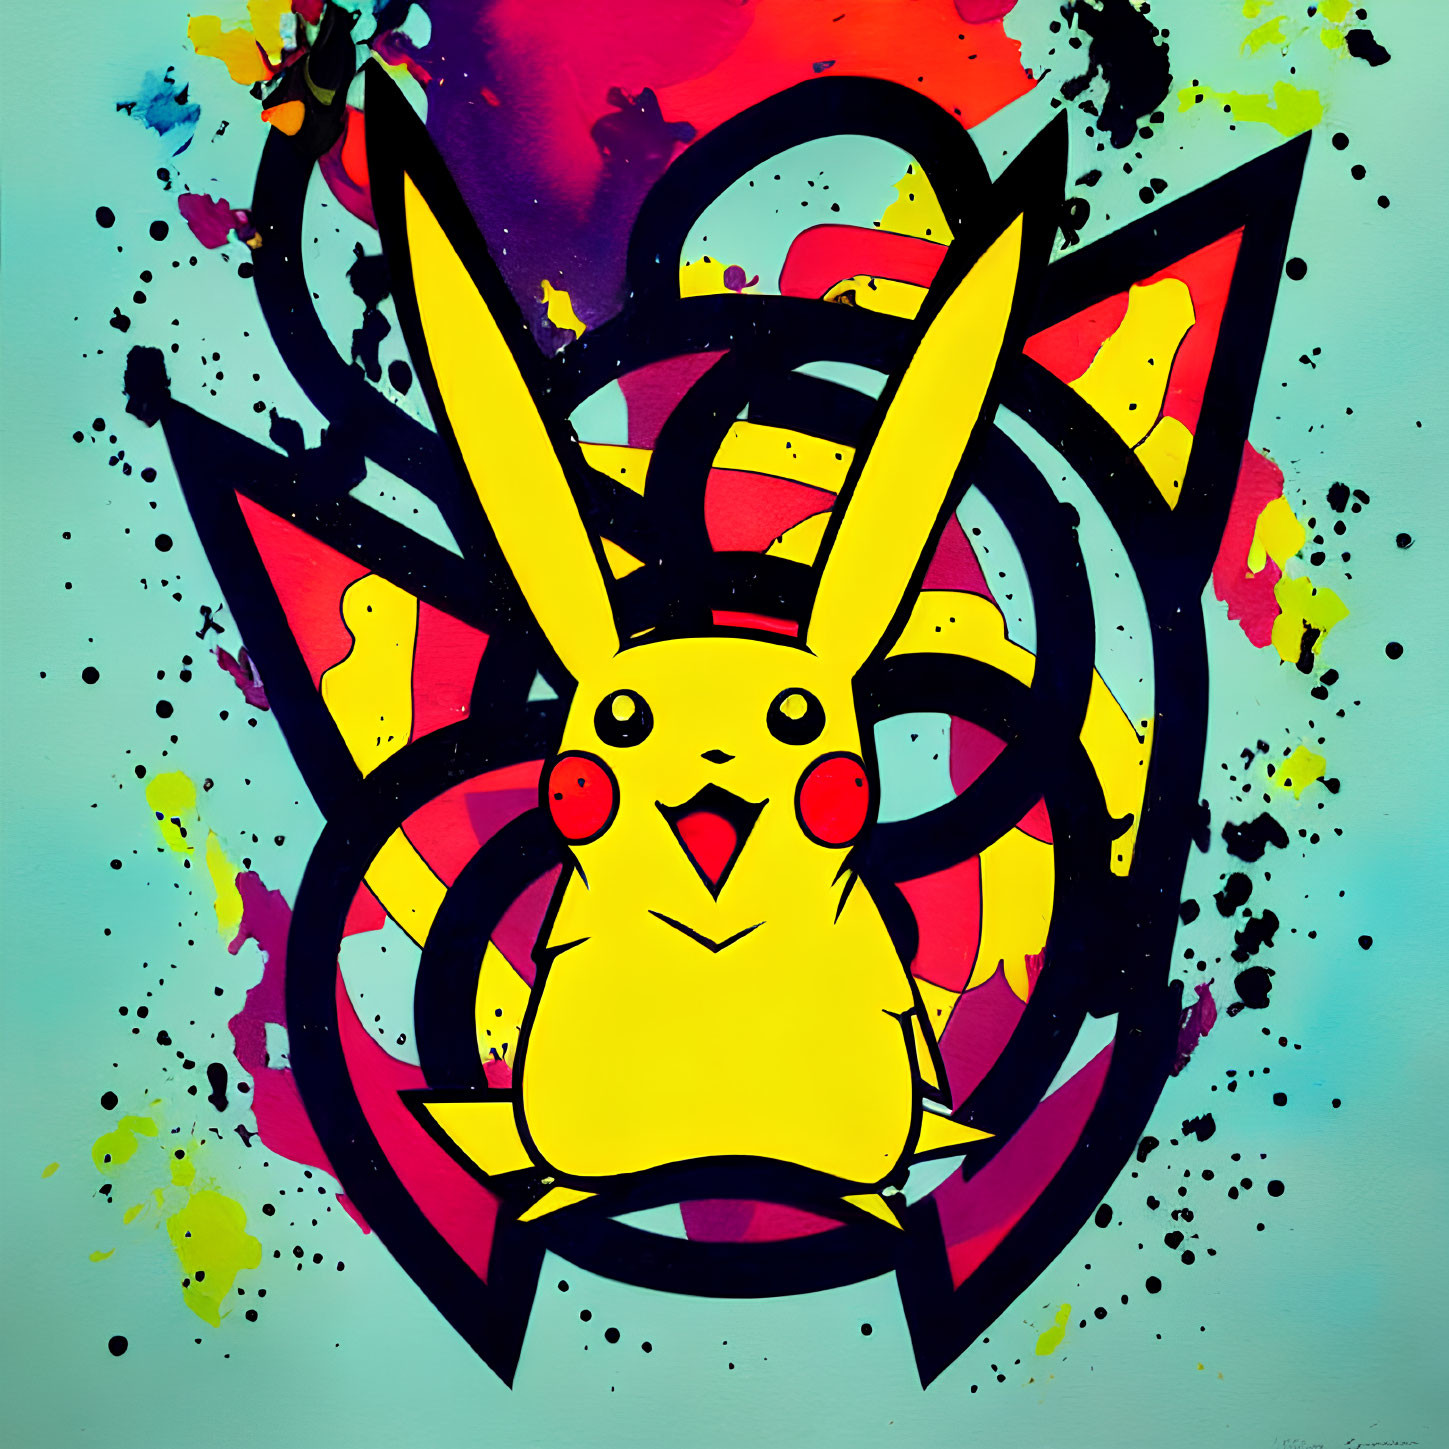 Colorful Pikachu Graffiti Art with Abstract Background